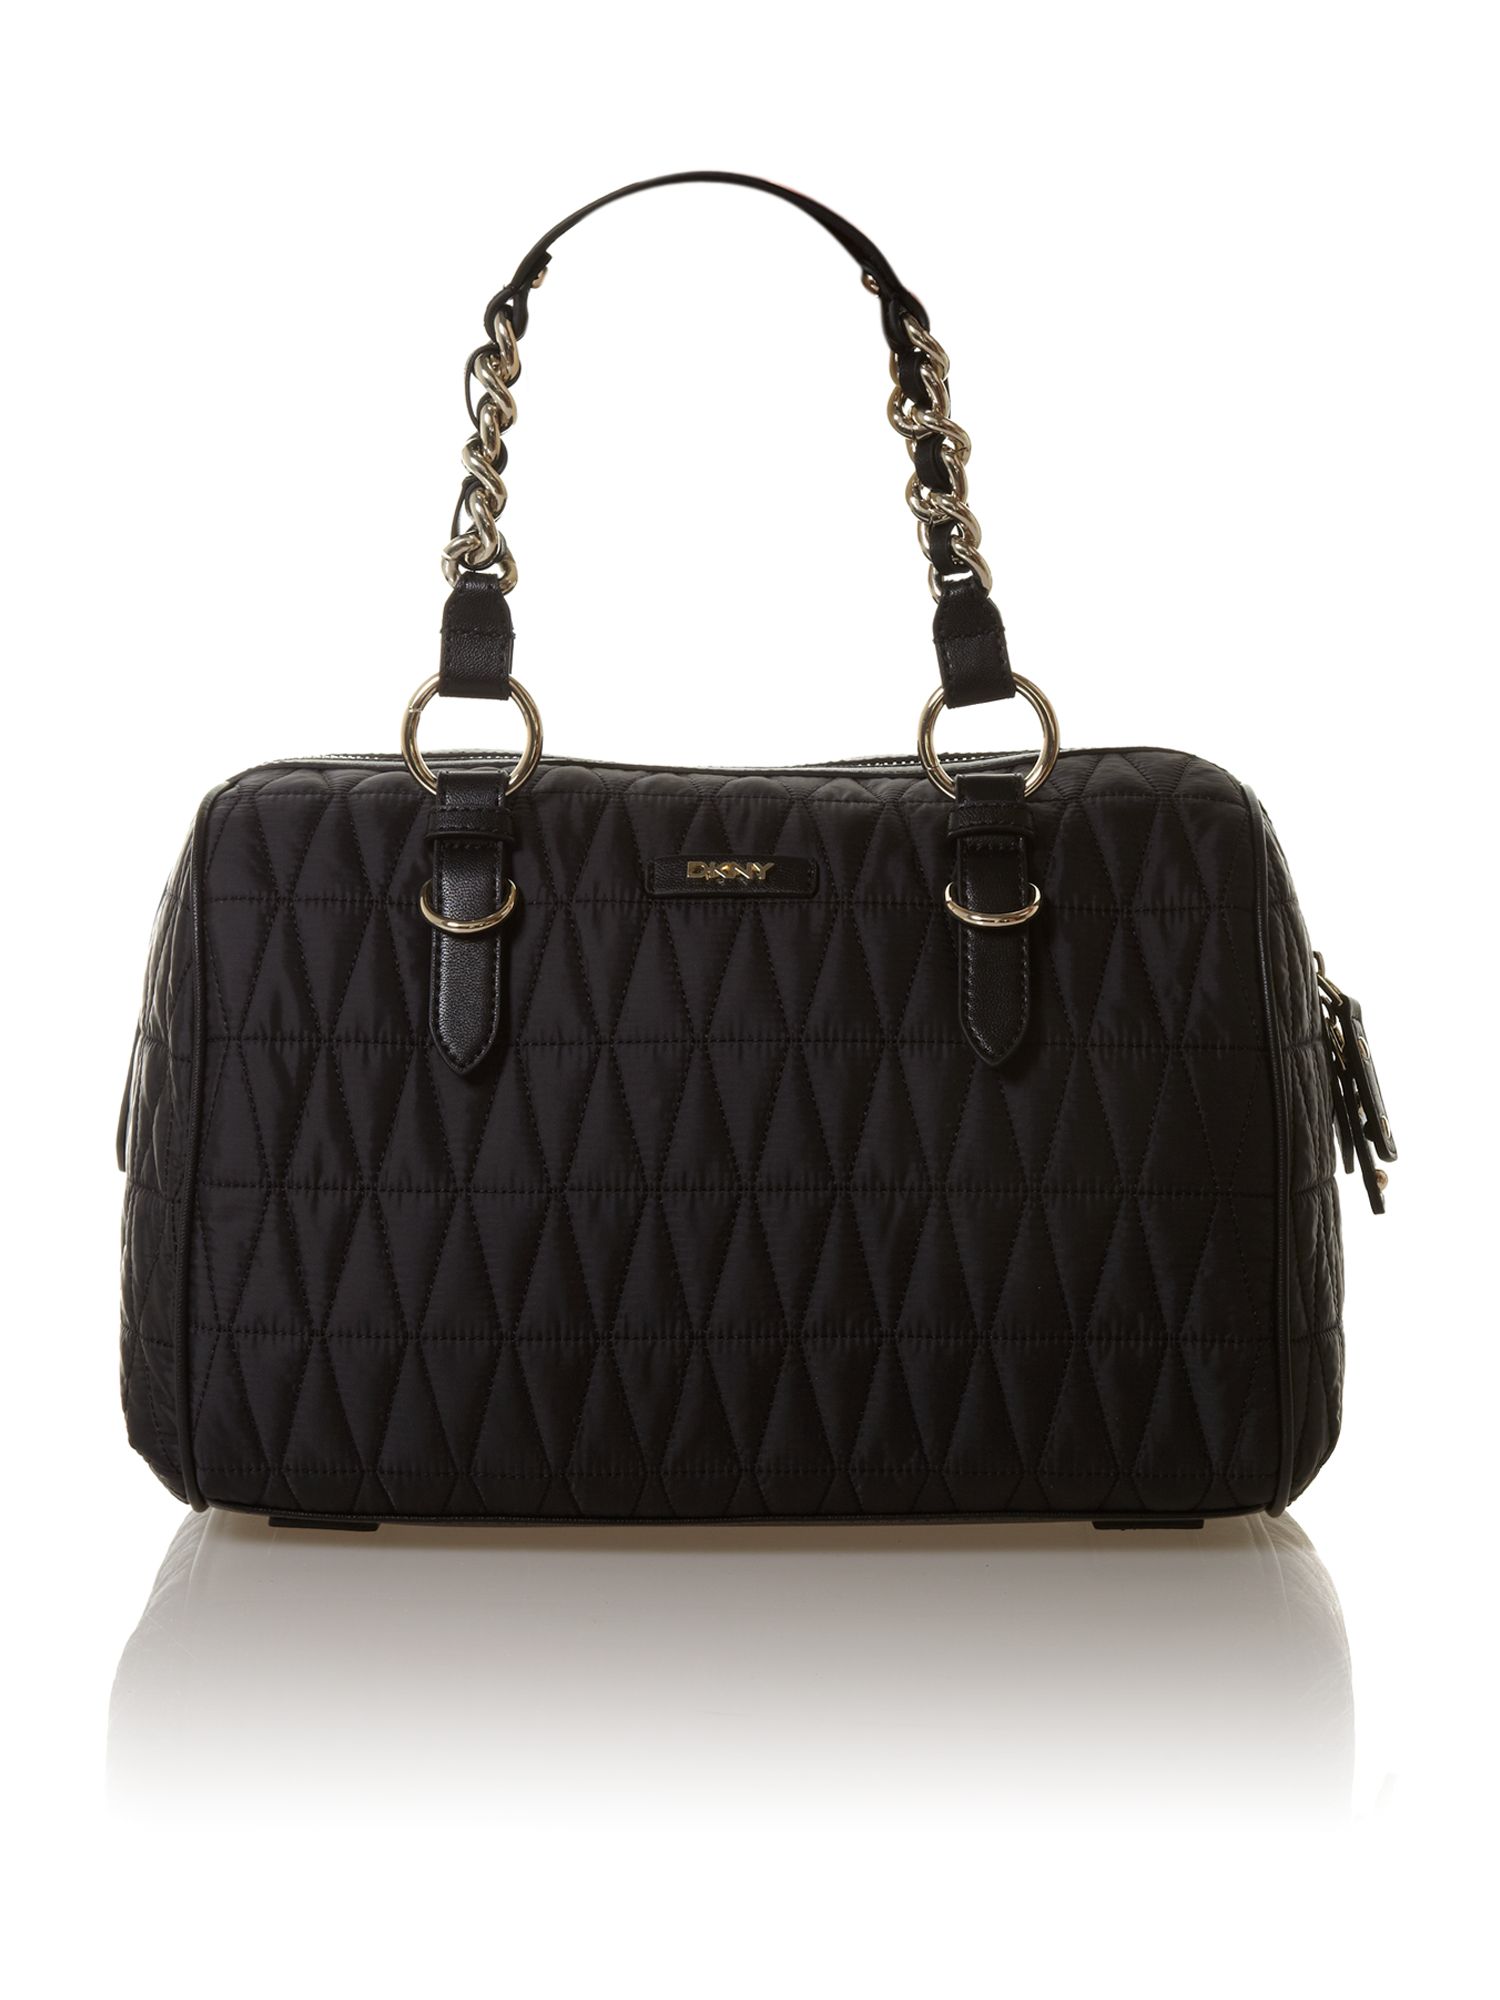 Dkny Quilted Black Bowling Bag in Black | Lyst